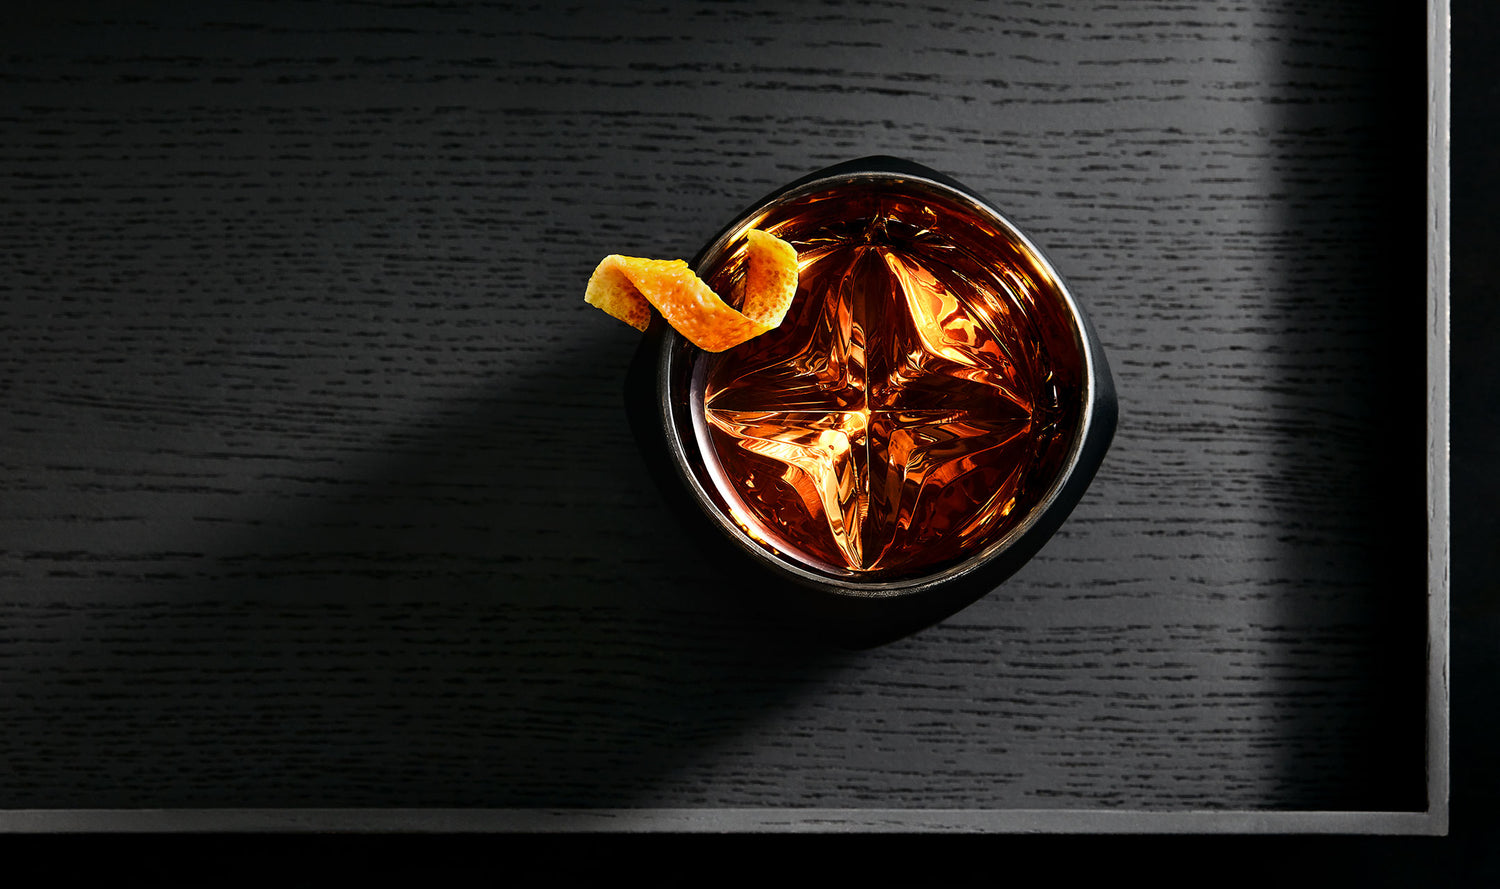 Enhance your whiskey with the Vaild black edition of the Rauk Heavy Tumbler is shown from above. A whisky-based cocktail served up with an orange peel garnish helps show how the fluid inside sparkles when light is reflected within. 